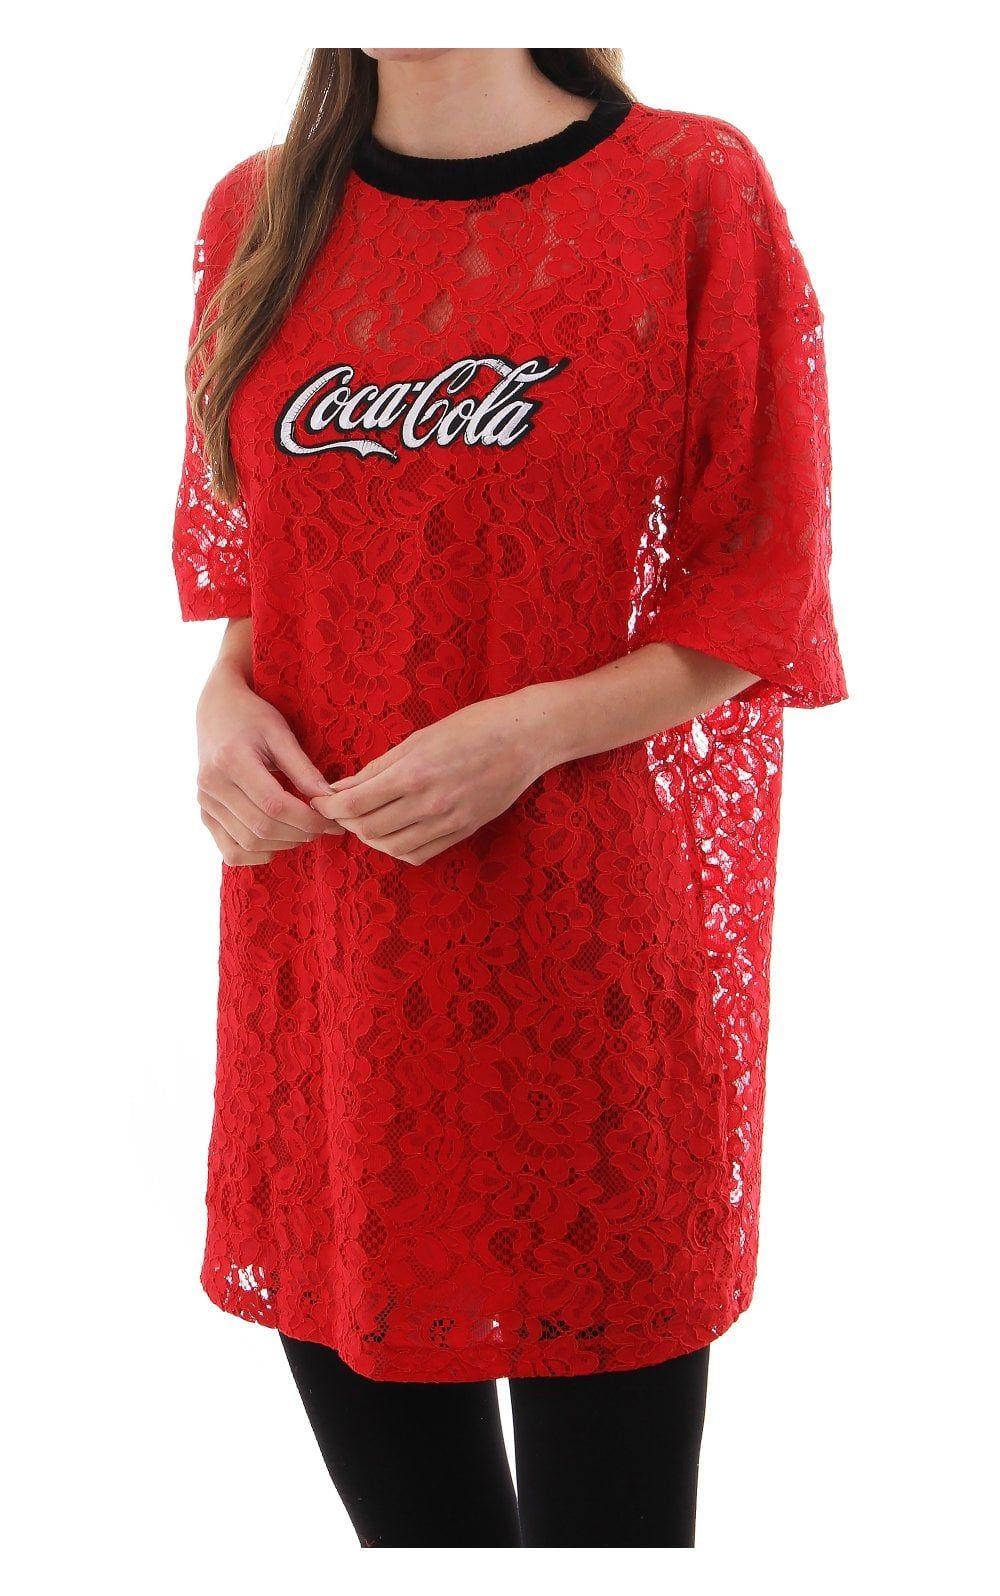 Red House Clothing Logo - House Of Stars House Of Stars Coca Cola Lace T Shirt Dress With Logo ...